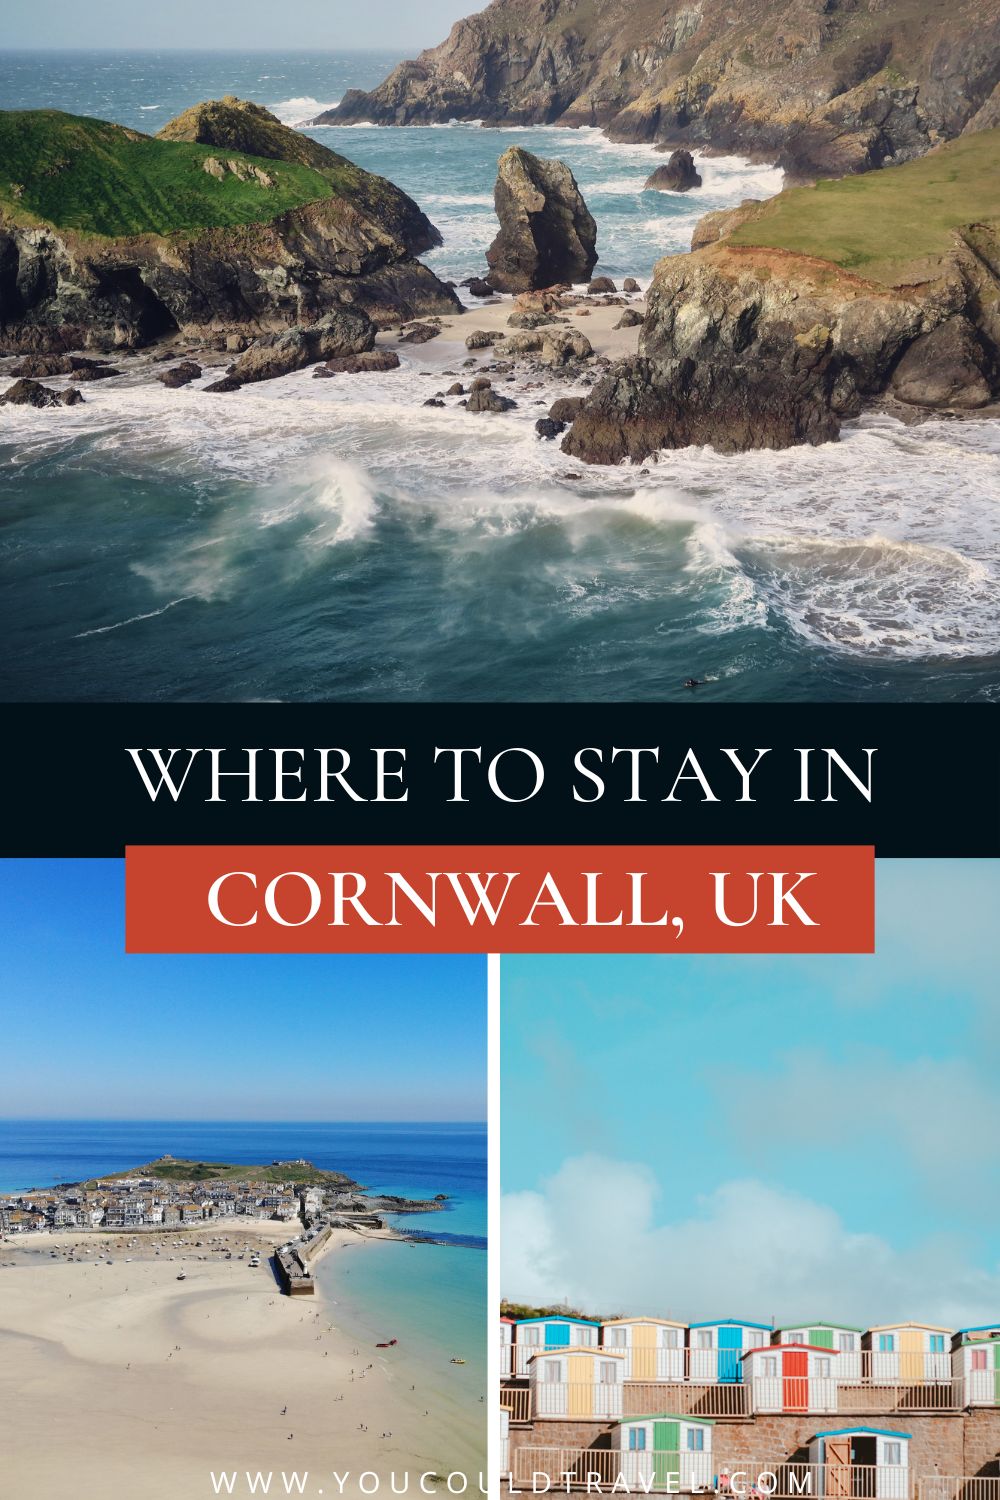 Where to stay in Cornwall, UK